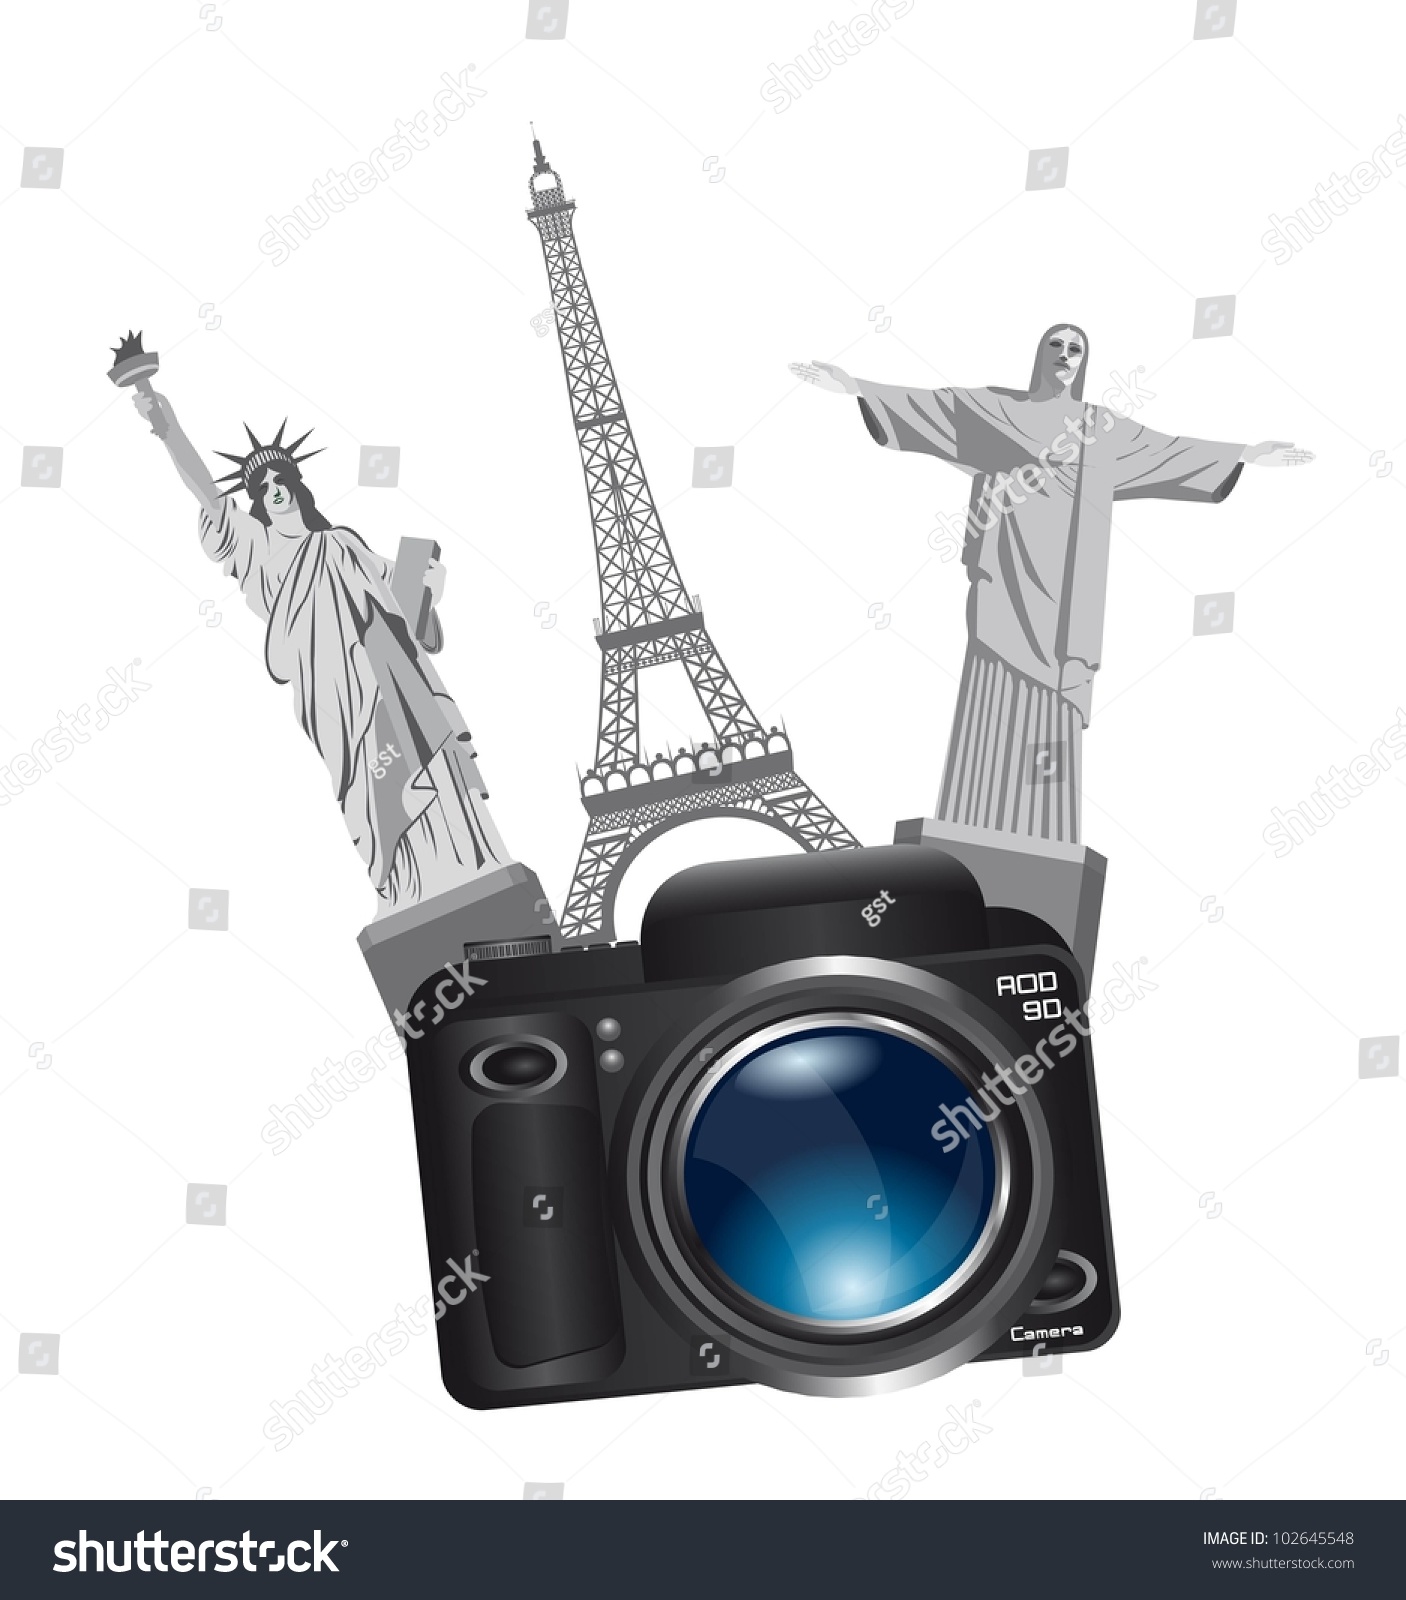 SVG of world monuments with camera isolated over white background. vector svg